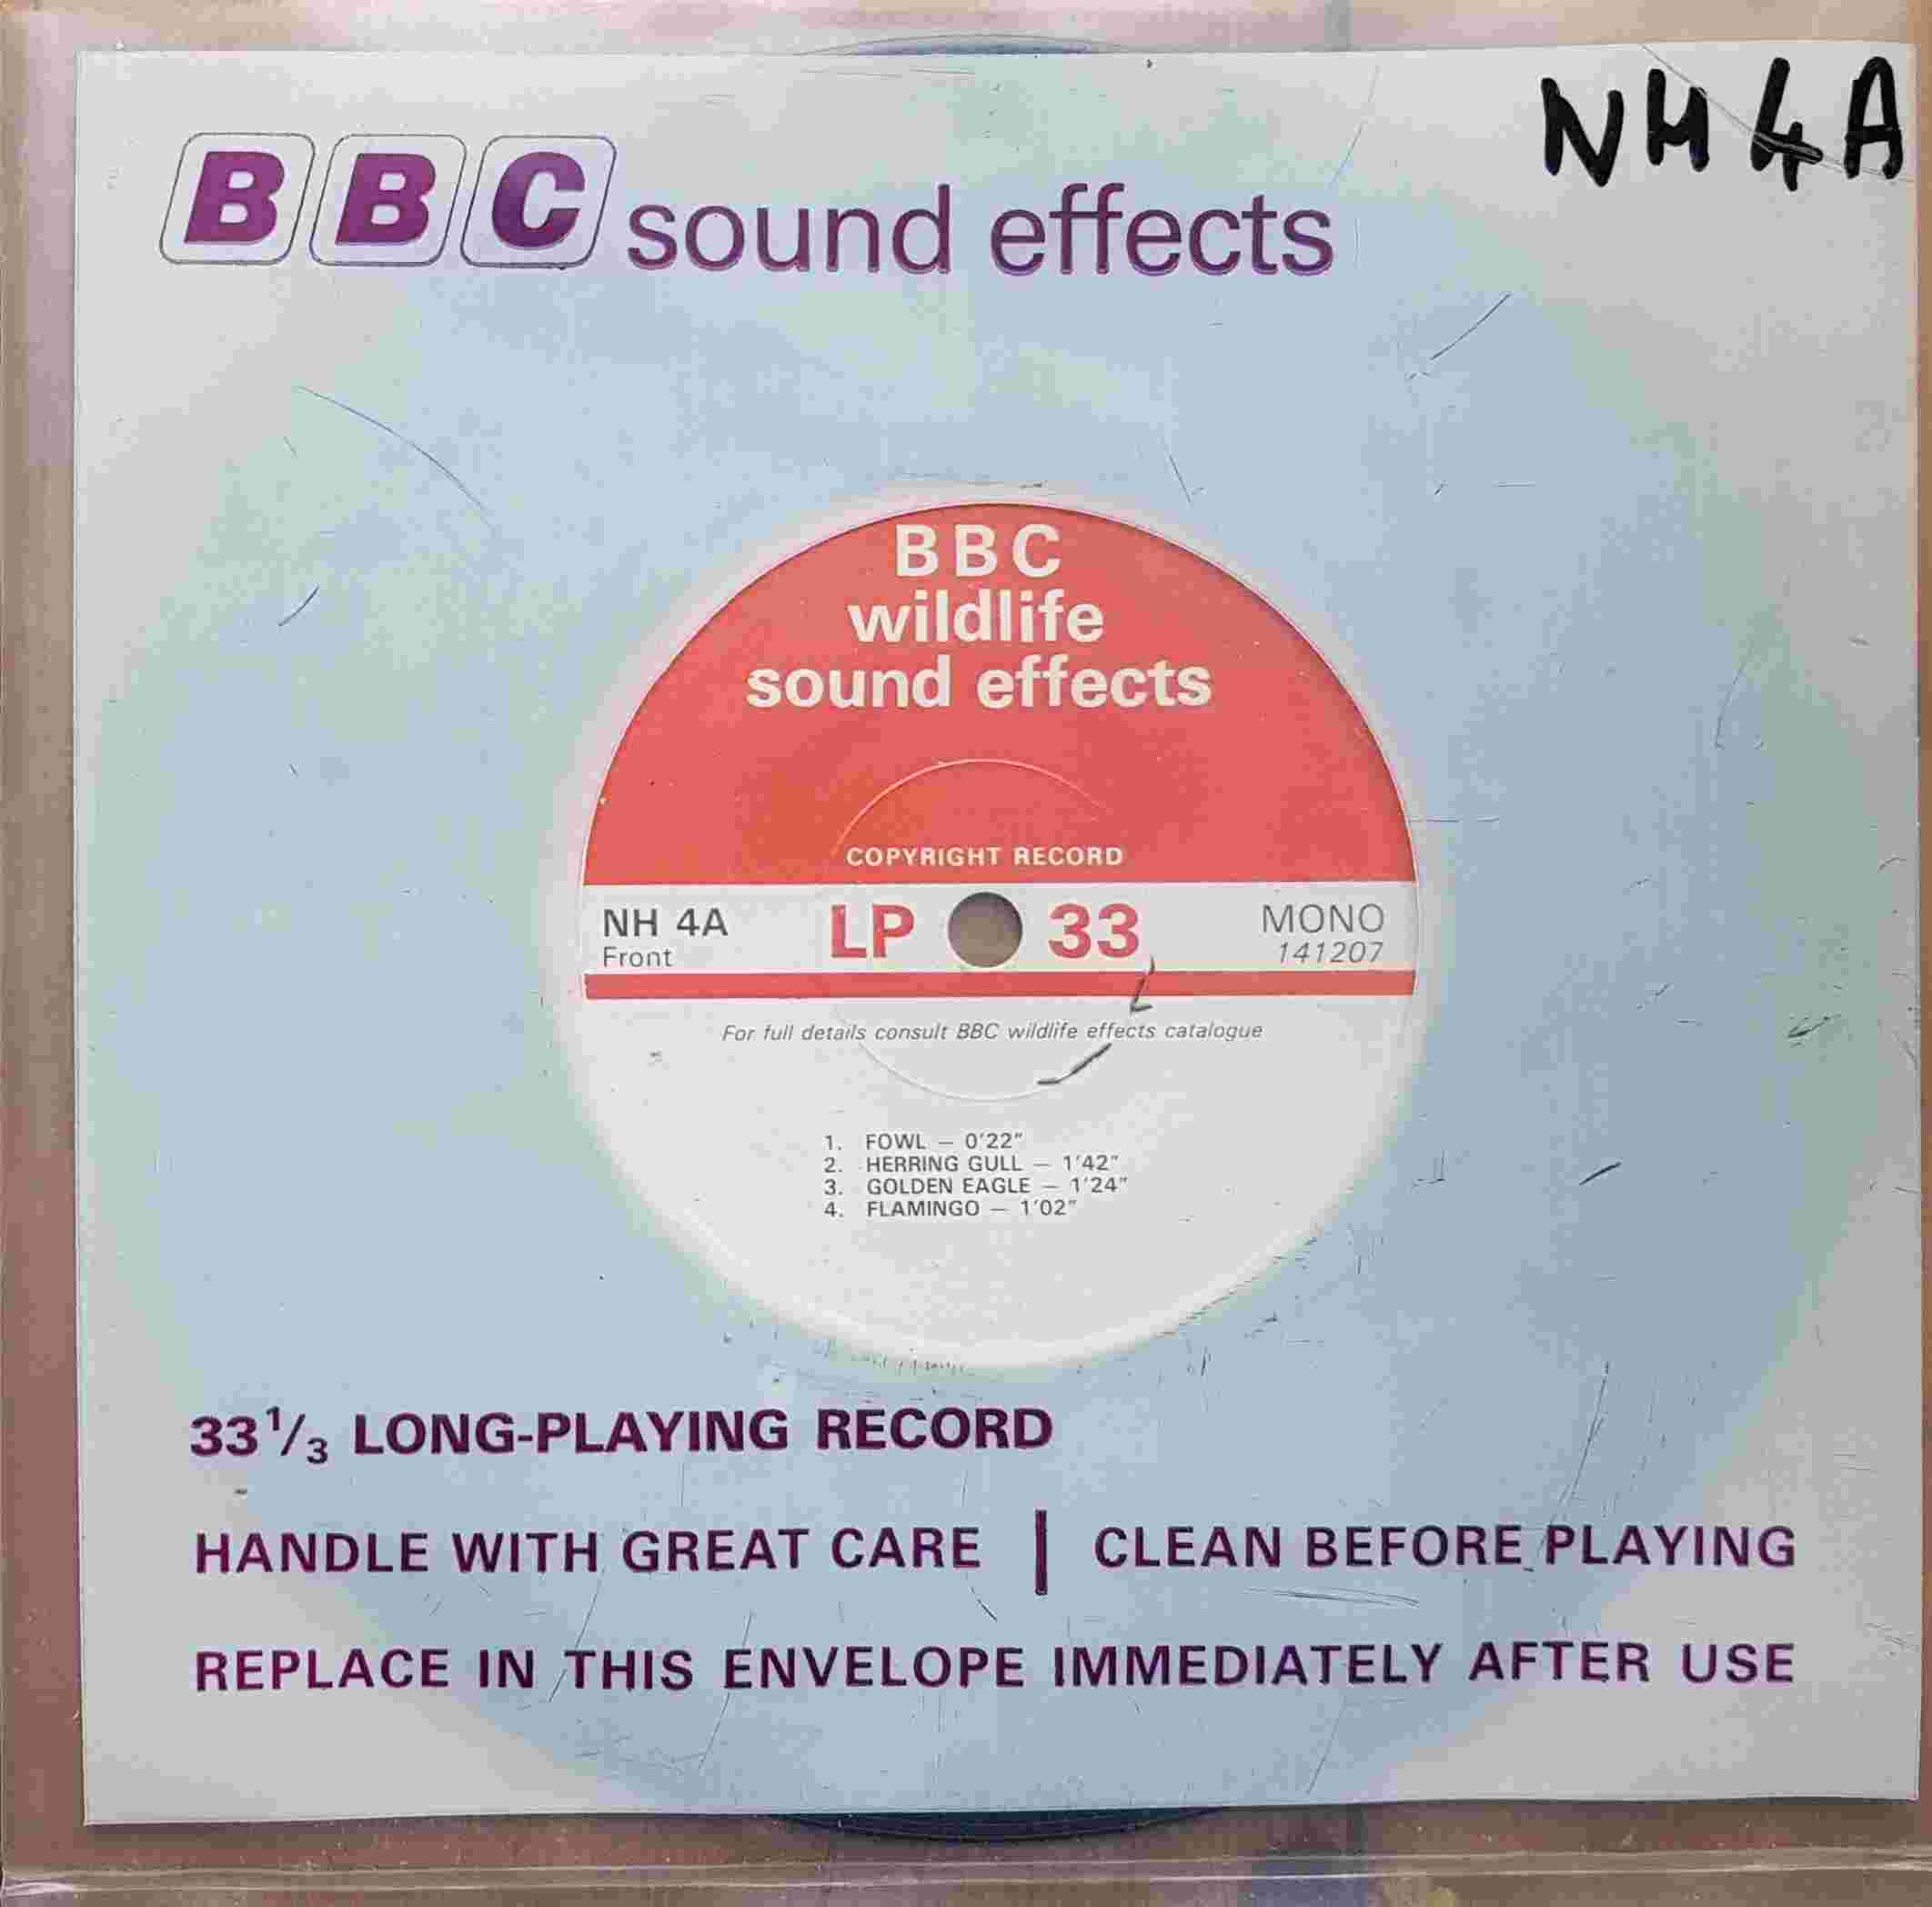 Picture of Birds by artist Not registered from the BBC singles - Records and Tapes library